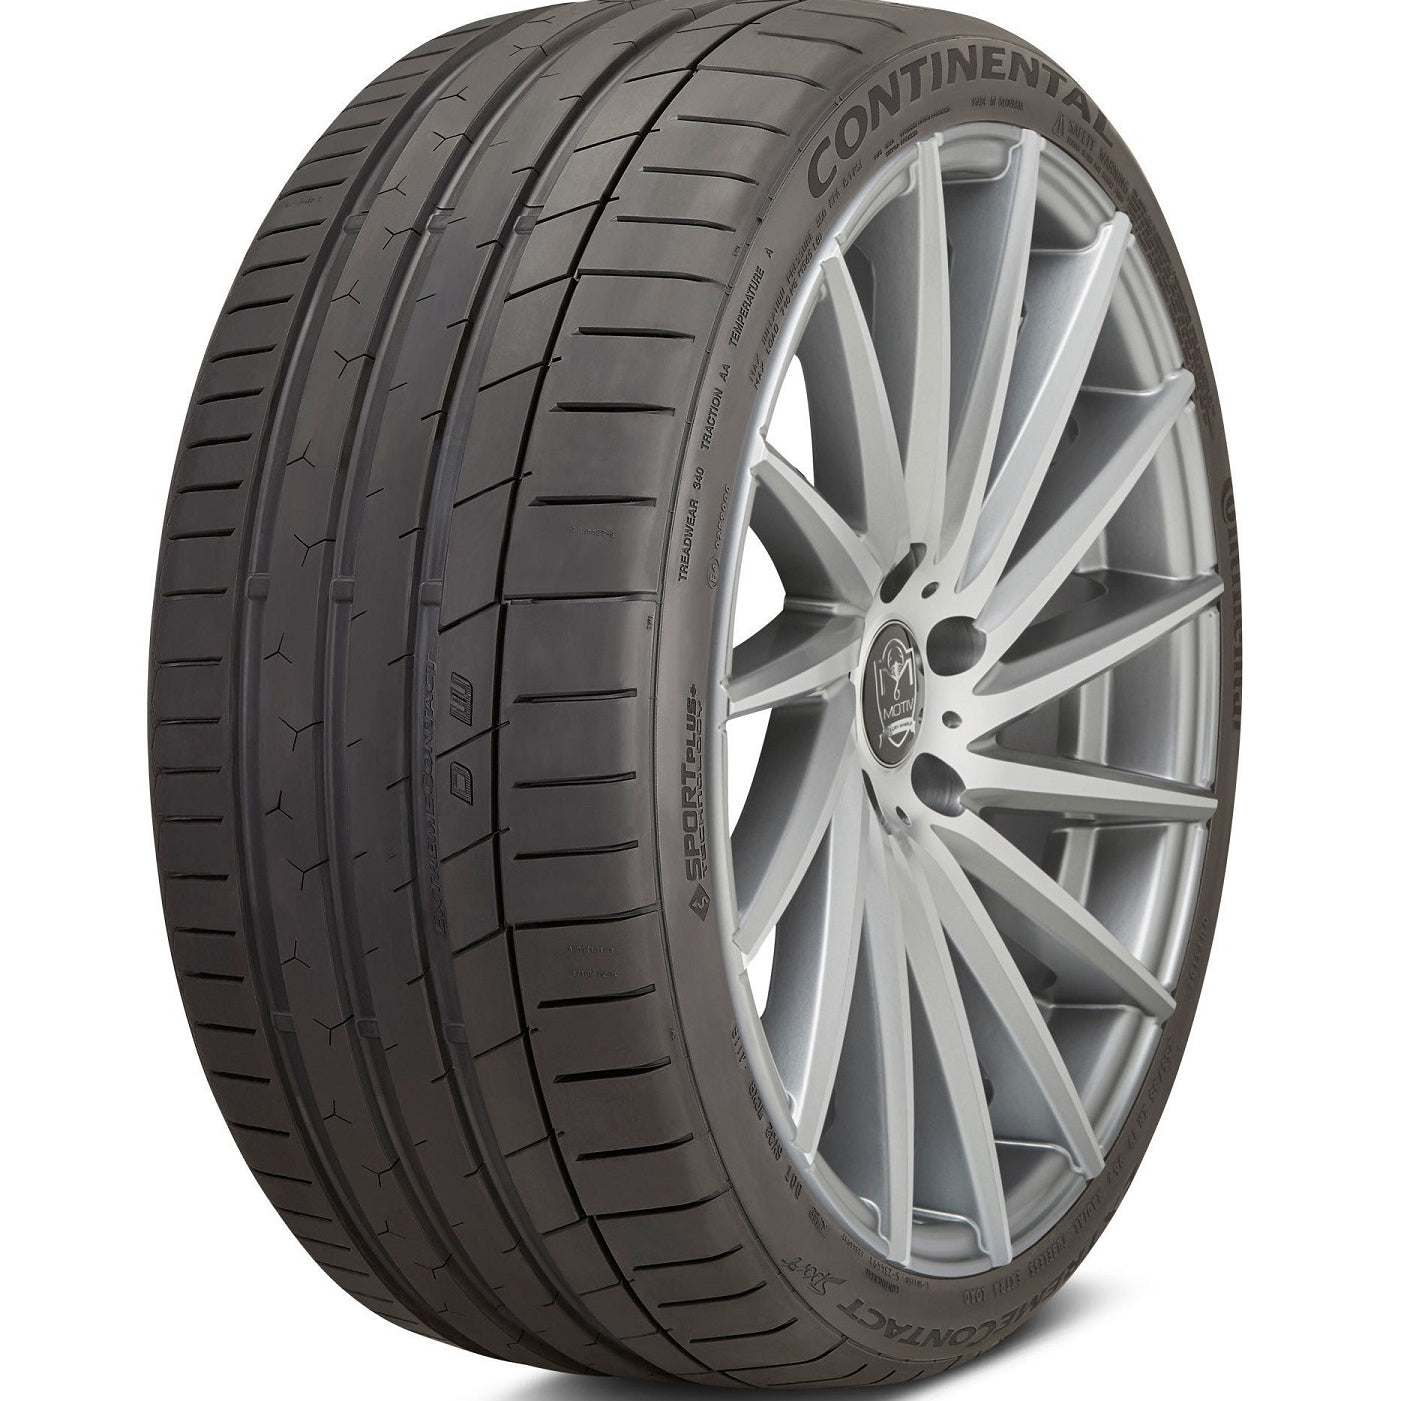 CONTINENTAL EXTREMECONTACT SPORT 235/40ZR18 (25.4X9.3R 18) Tires